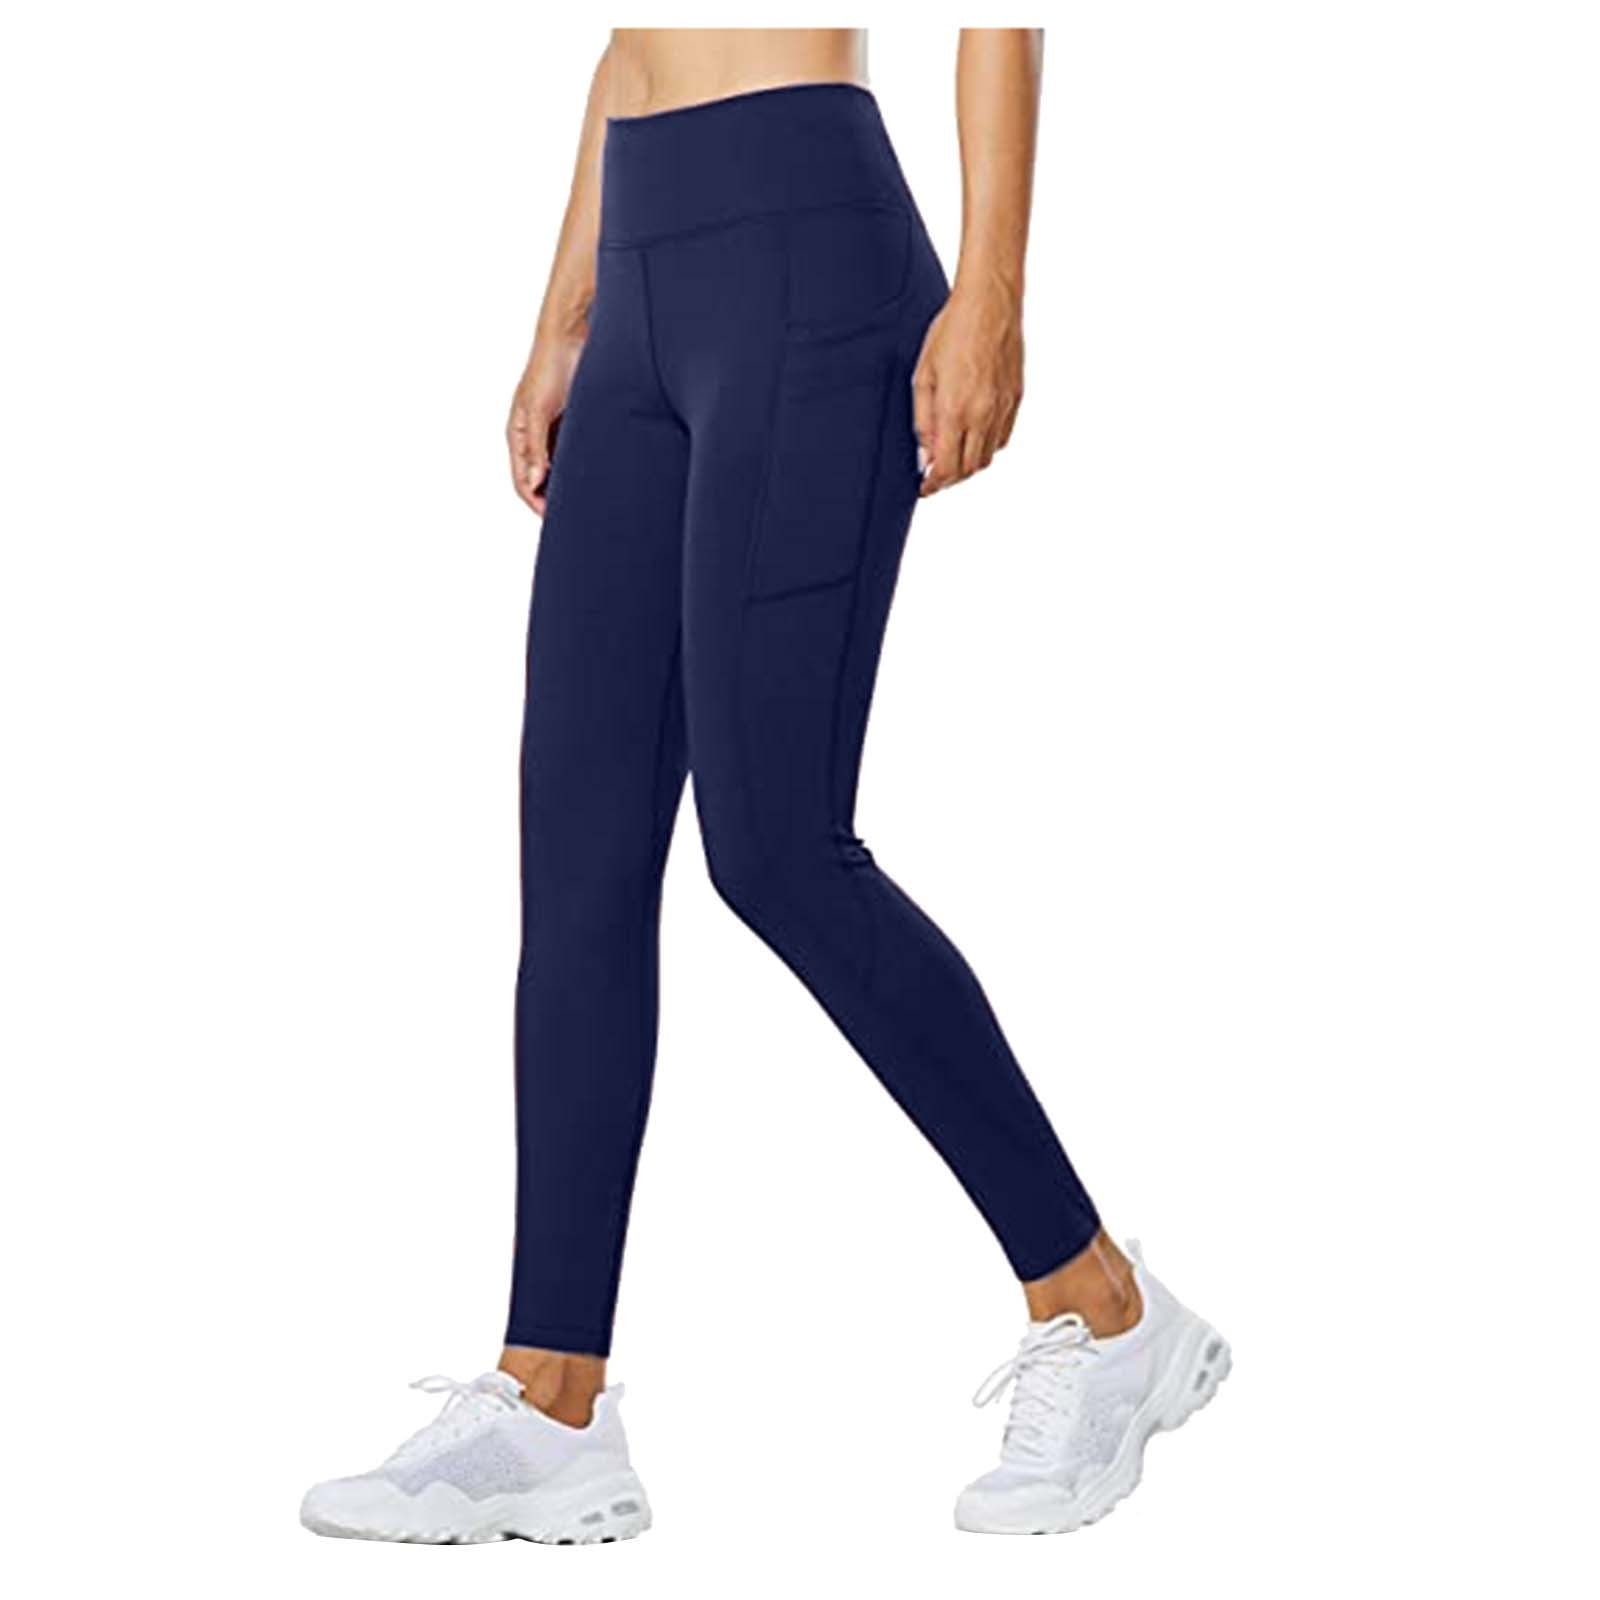 Women's Compression Thermal Leggings - Blue Navy | Craghoppers UK